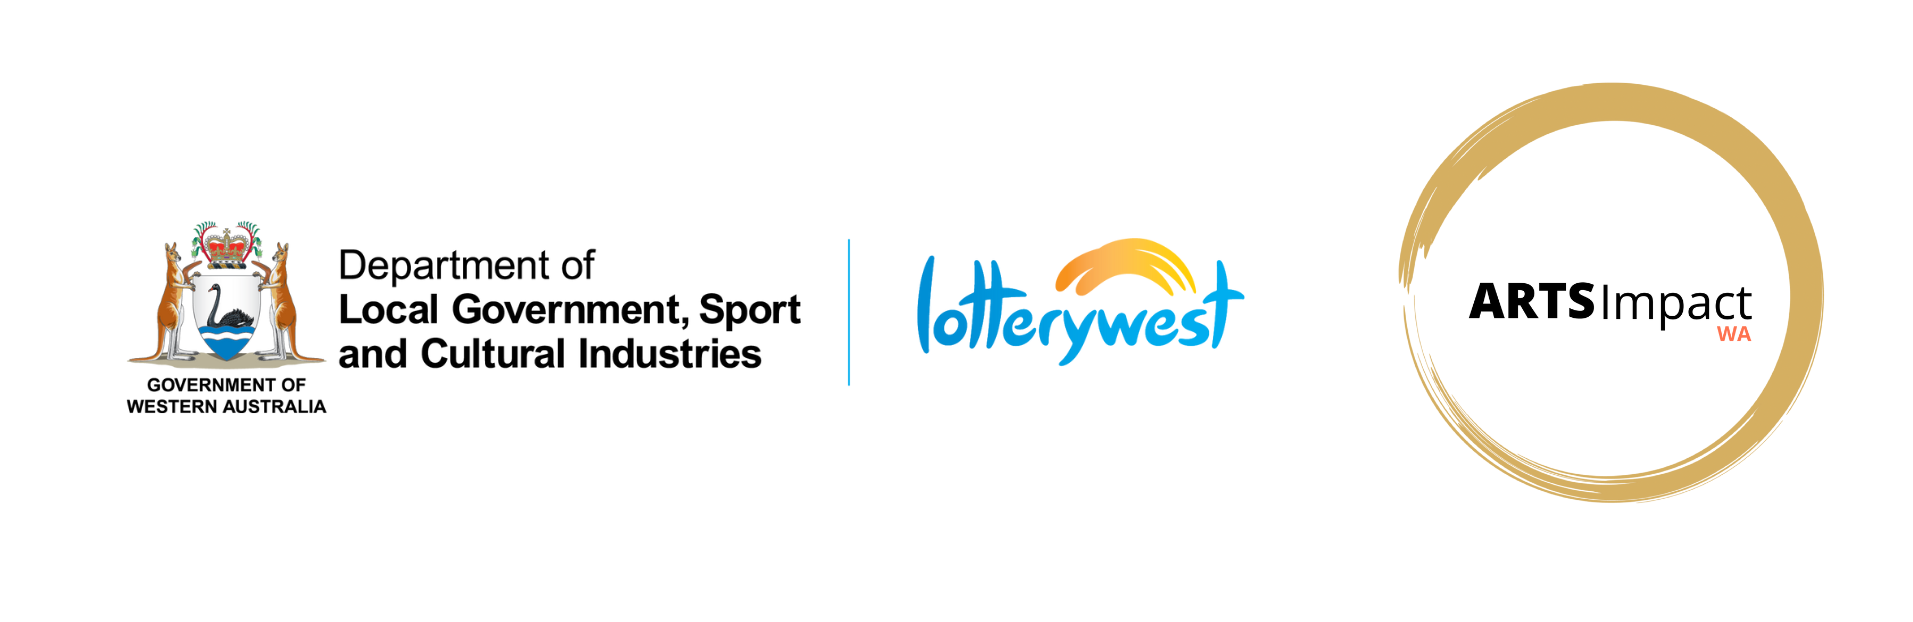 Department of Local Government Sport and Cultural Industries Logo, Lotterywest Logo, Impact Arts Logo